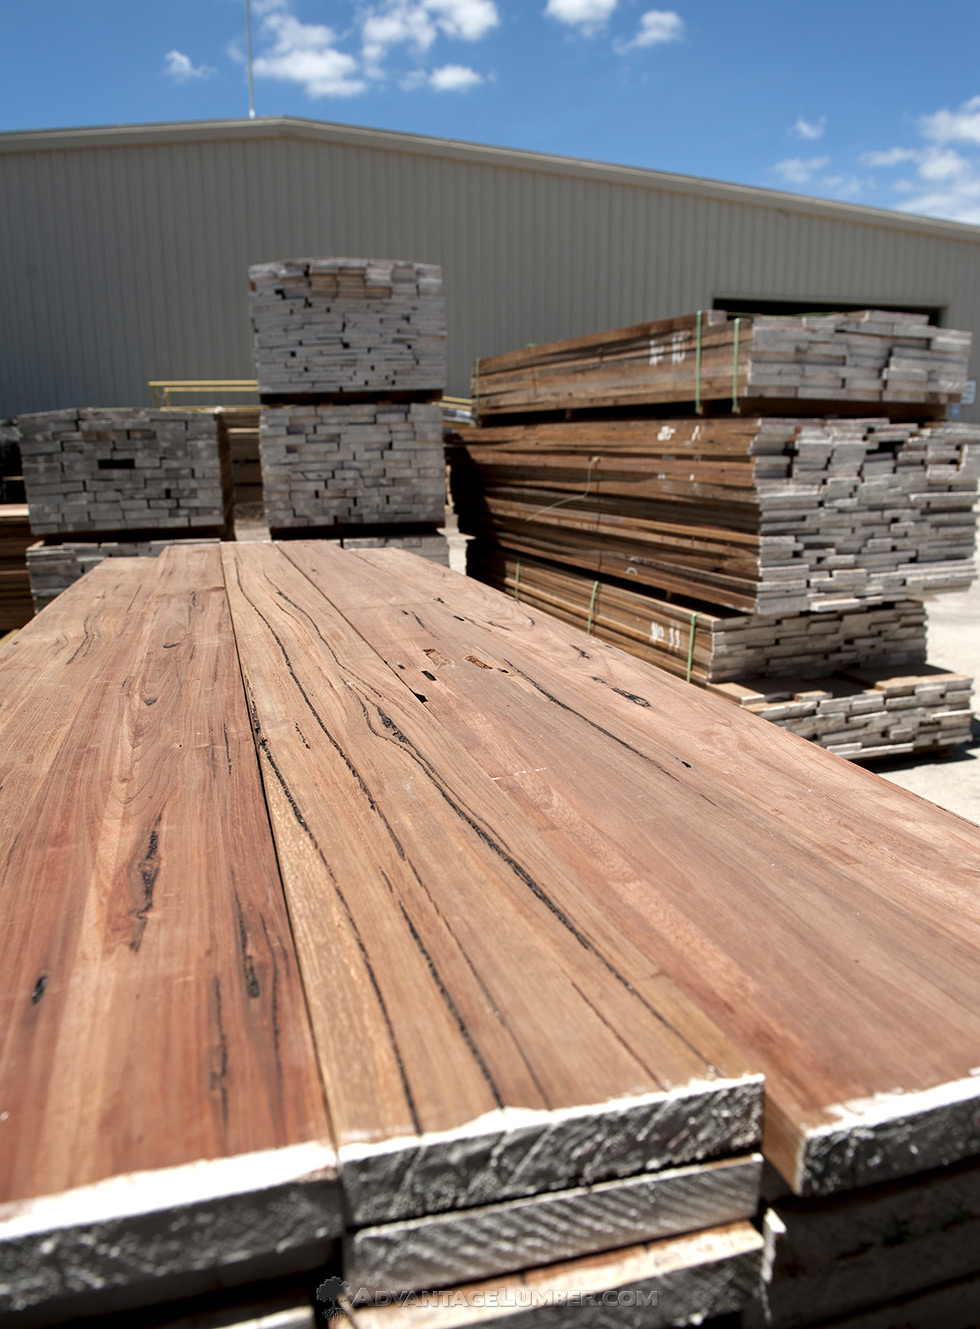 We just received a large shipment of Pecky Bolivian Walnut lumber.